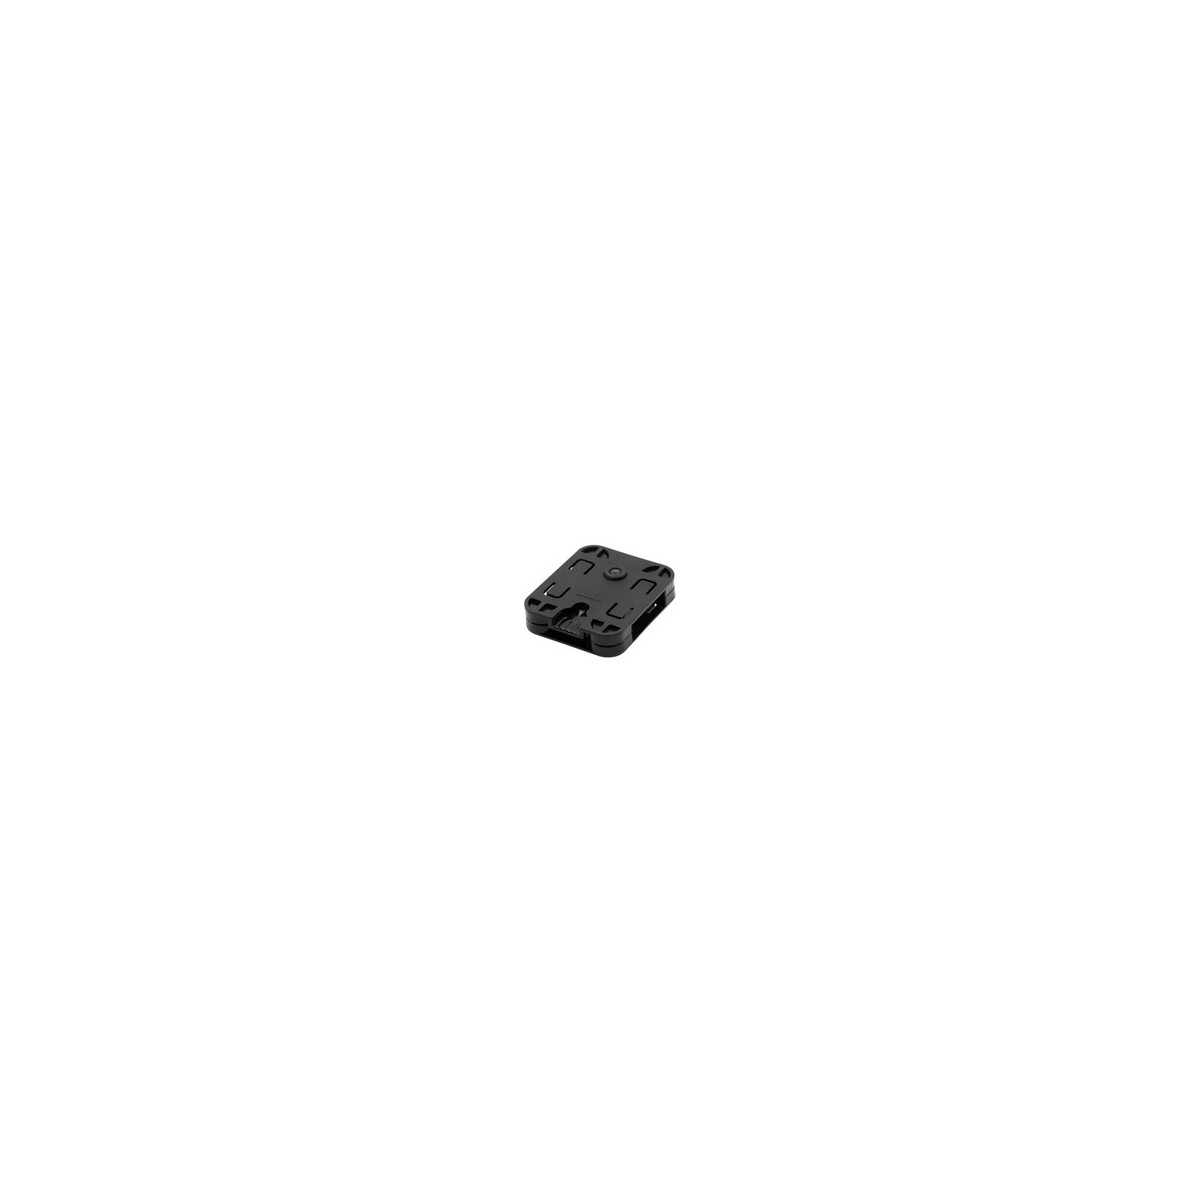 Axis 02437-001 - Mount - Black - Axis - W101 - 1 pc(s)